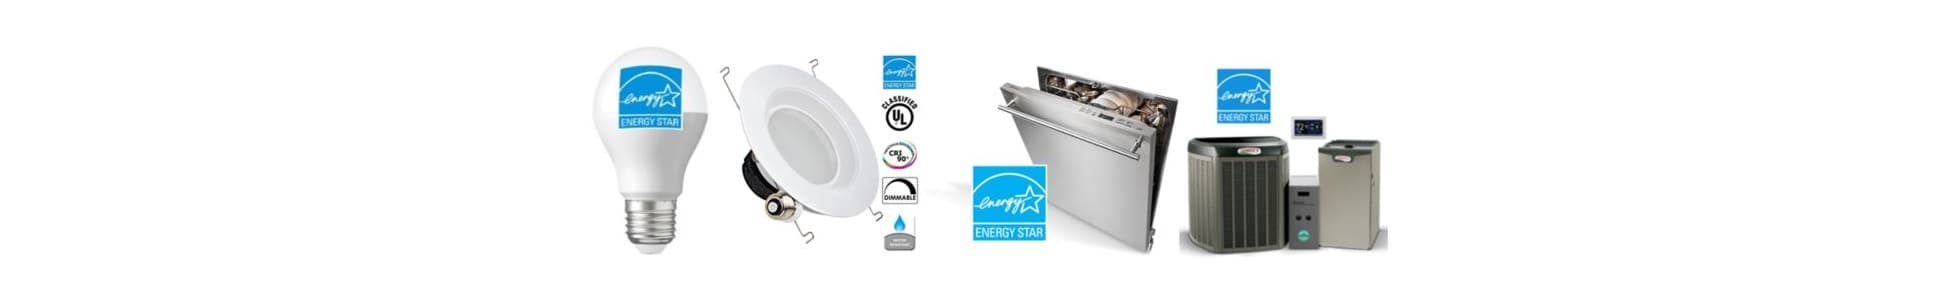 Energy Star Examples